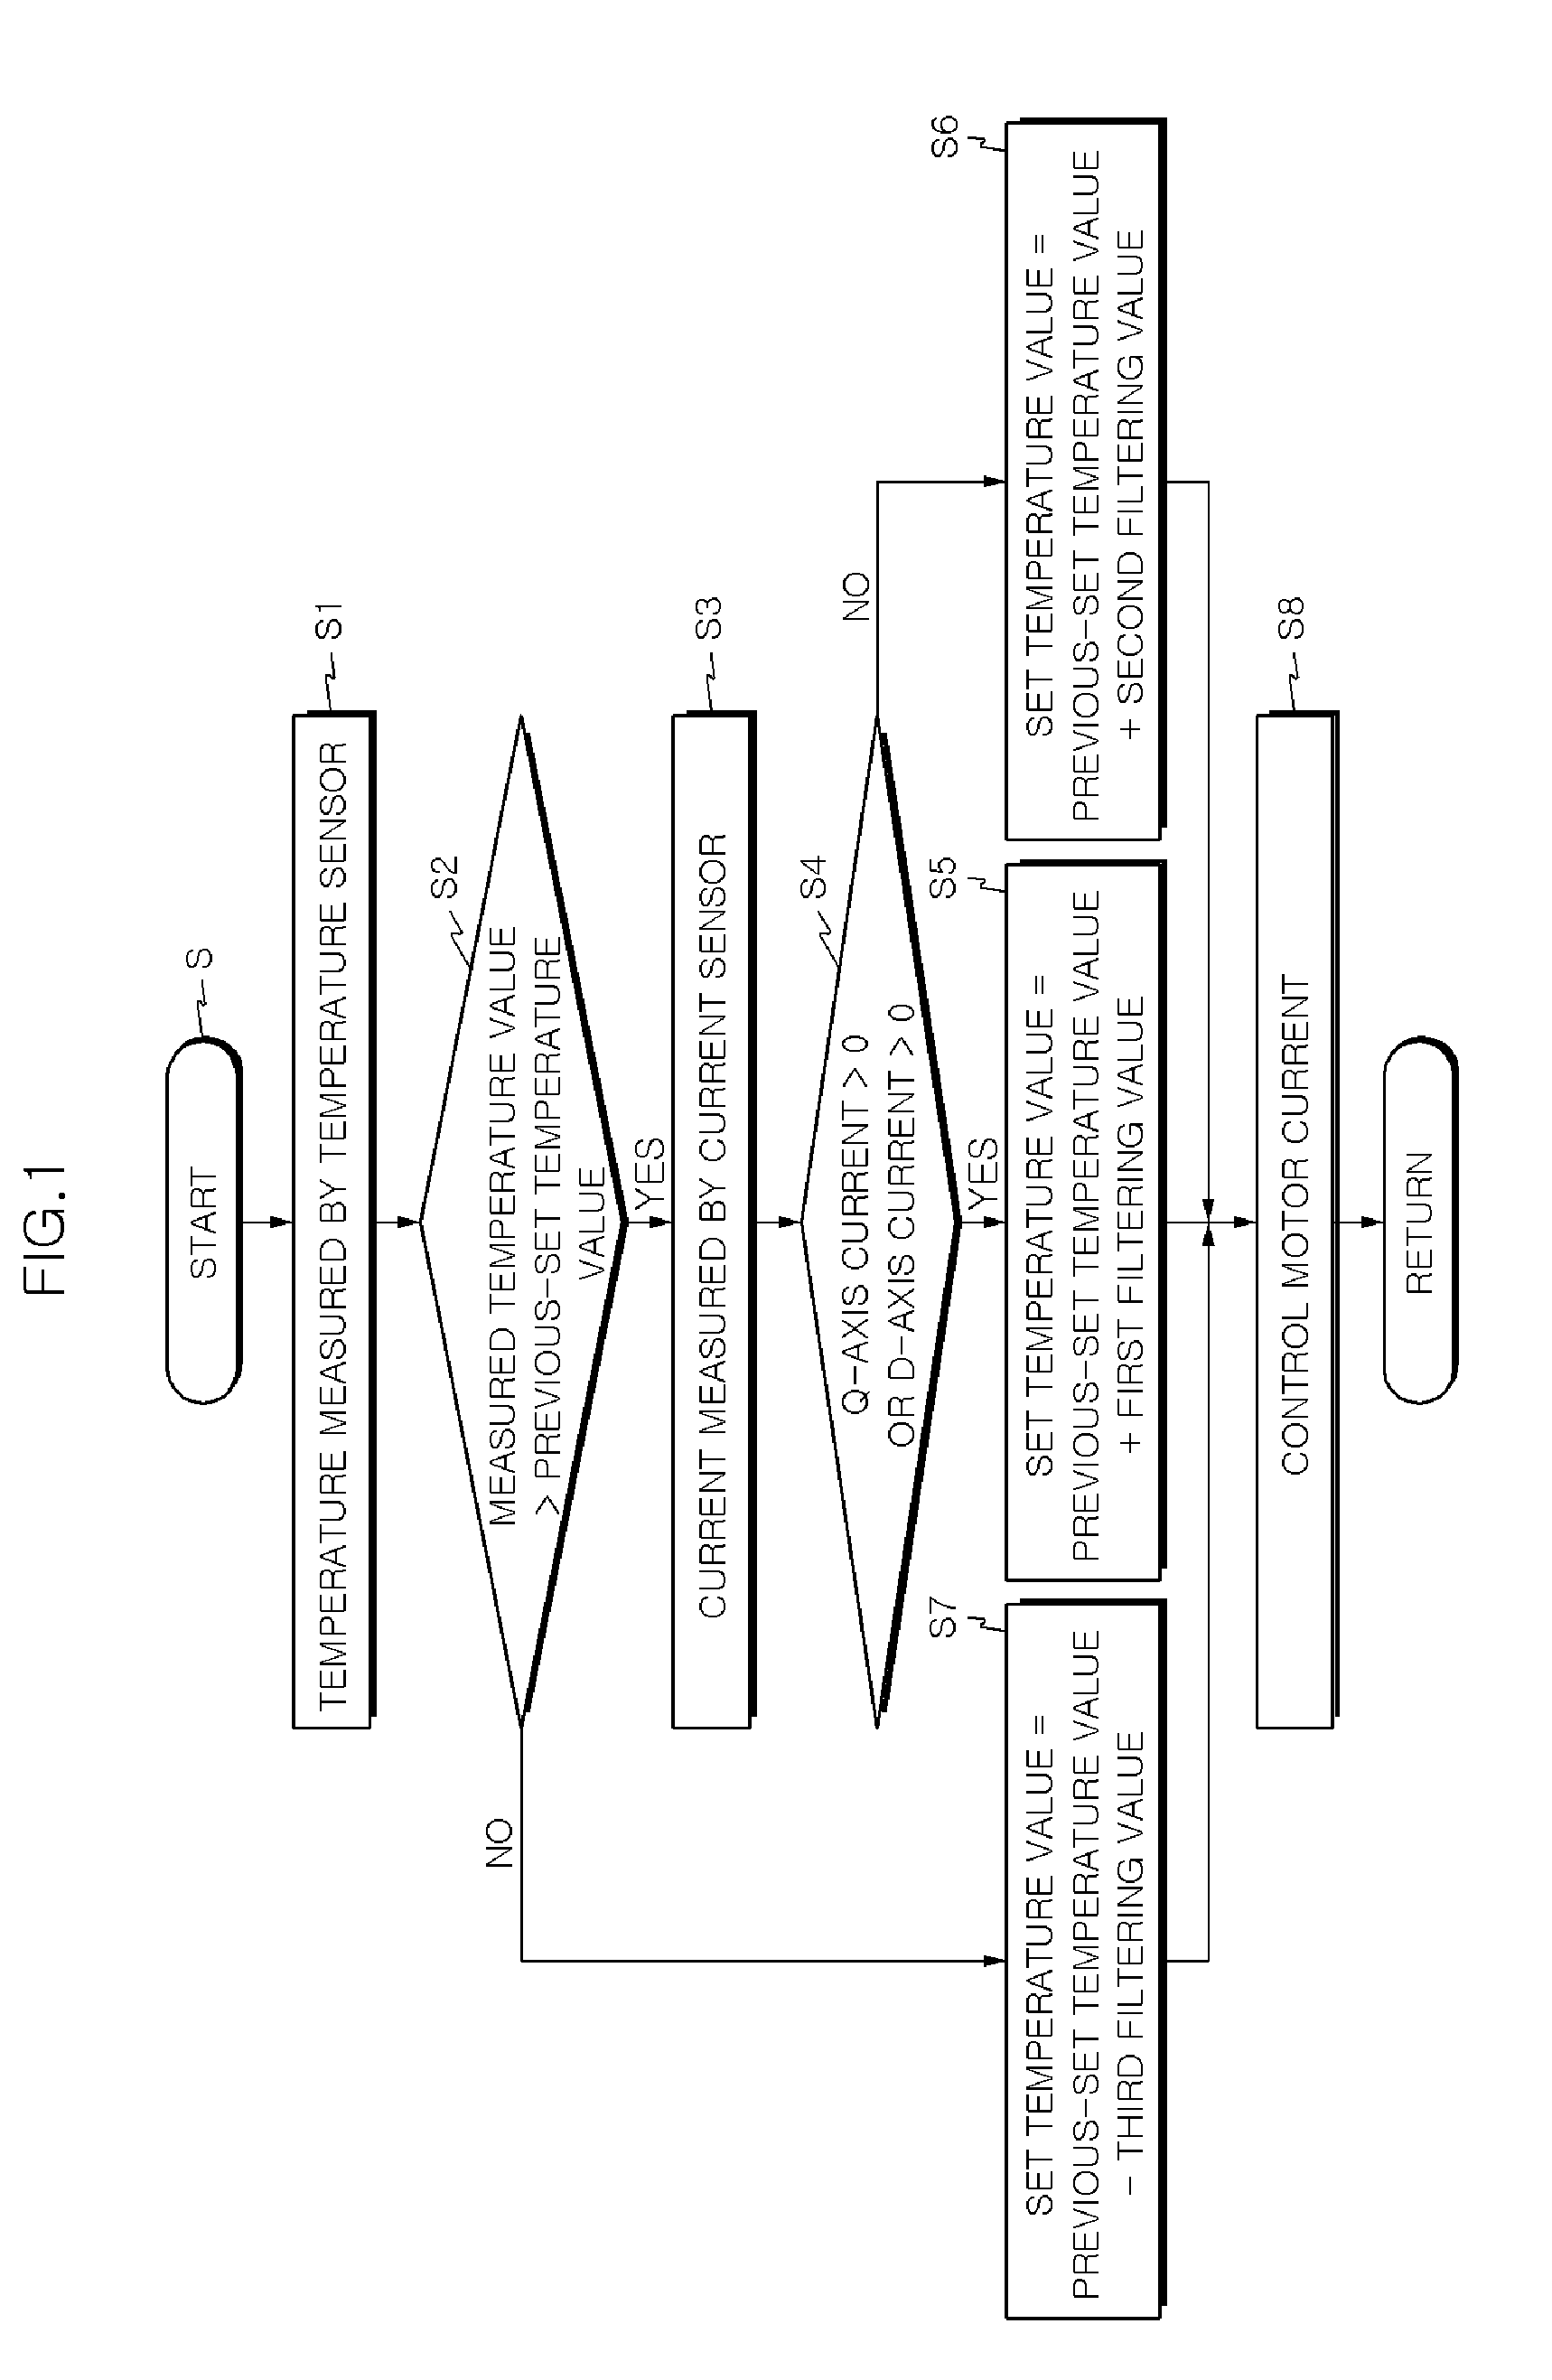 Method of protecting motor-driven steering system from overheat